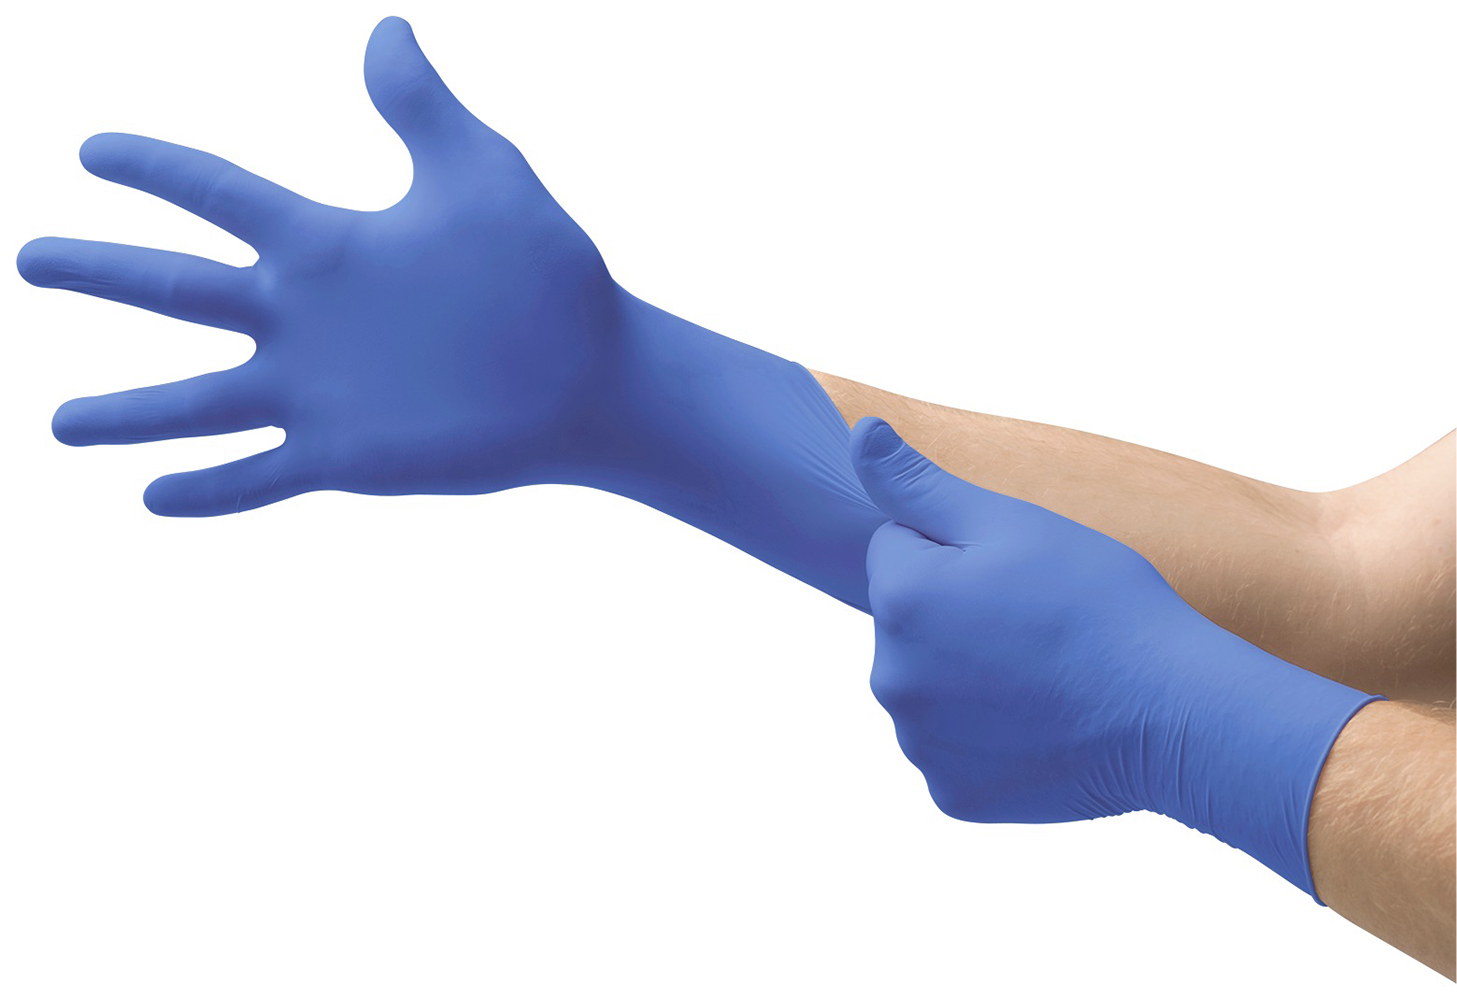 Ansell Cobalt N19 Nitrile Glove | Photo courtesy of Ansell